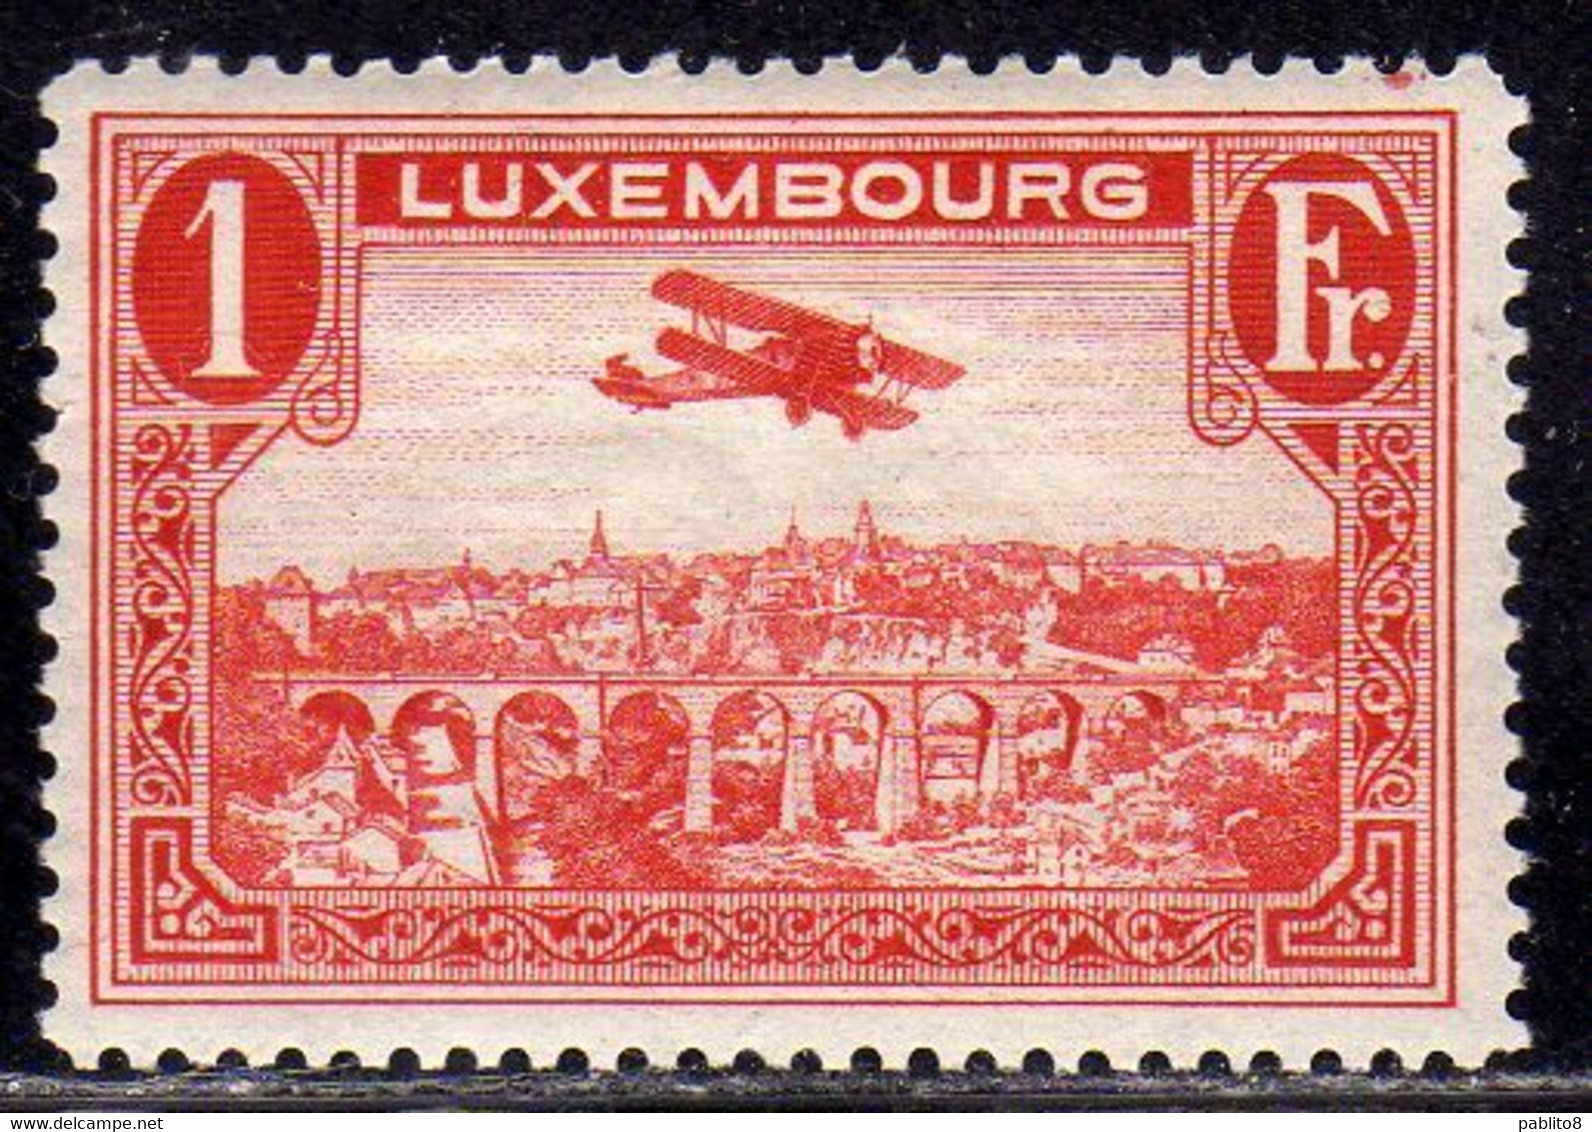 LUXEMBOURG LUSSEMBURGO 1931 1933 AIR POST STAMPS AIRMAIL AIRPLANE OVER POSTA AEREA 1fr MNH - Unused Stamps